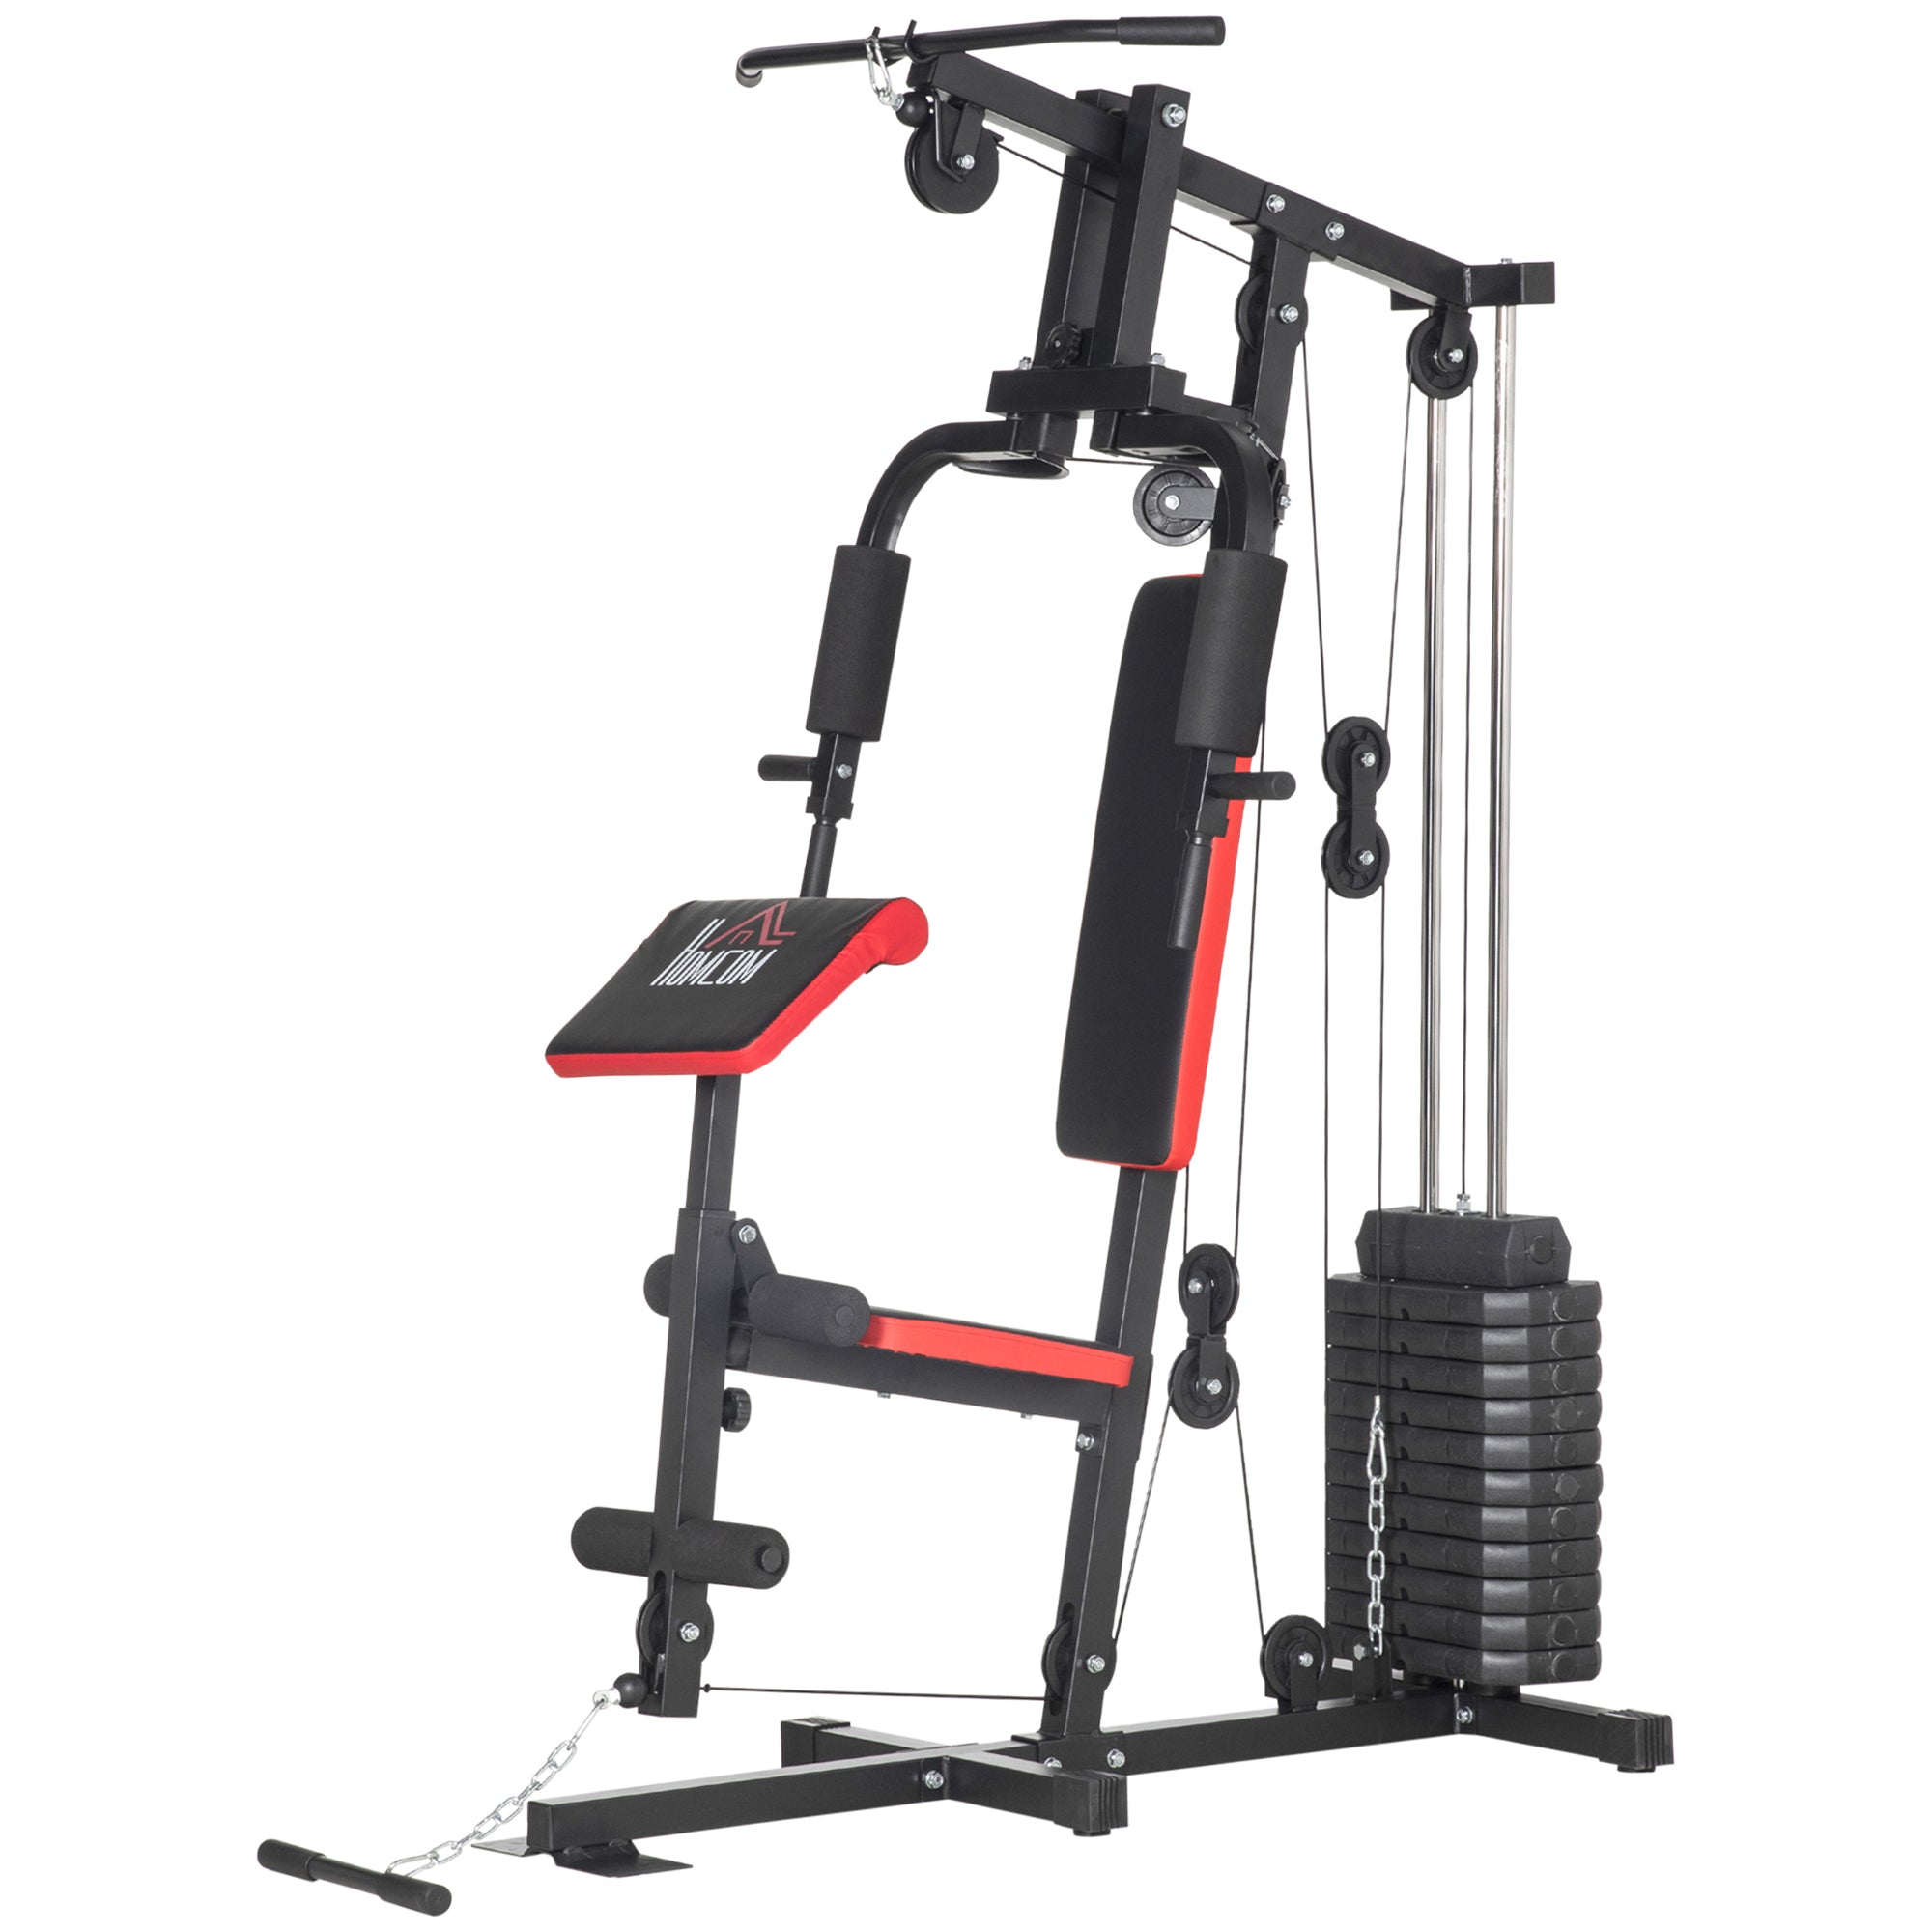 Multi Home Gym Machine with 66Kg Weight Stack for Workout Strength Training